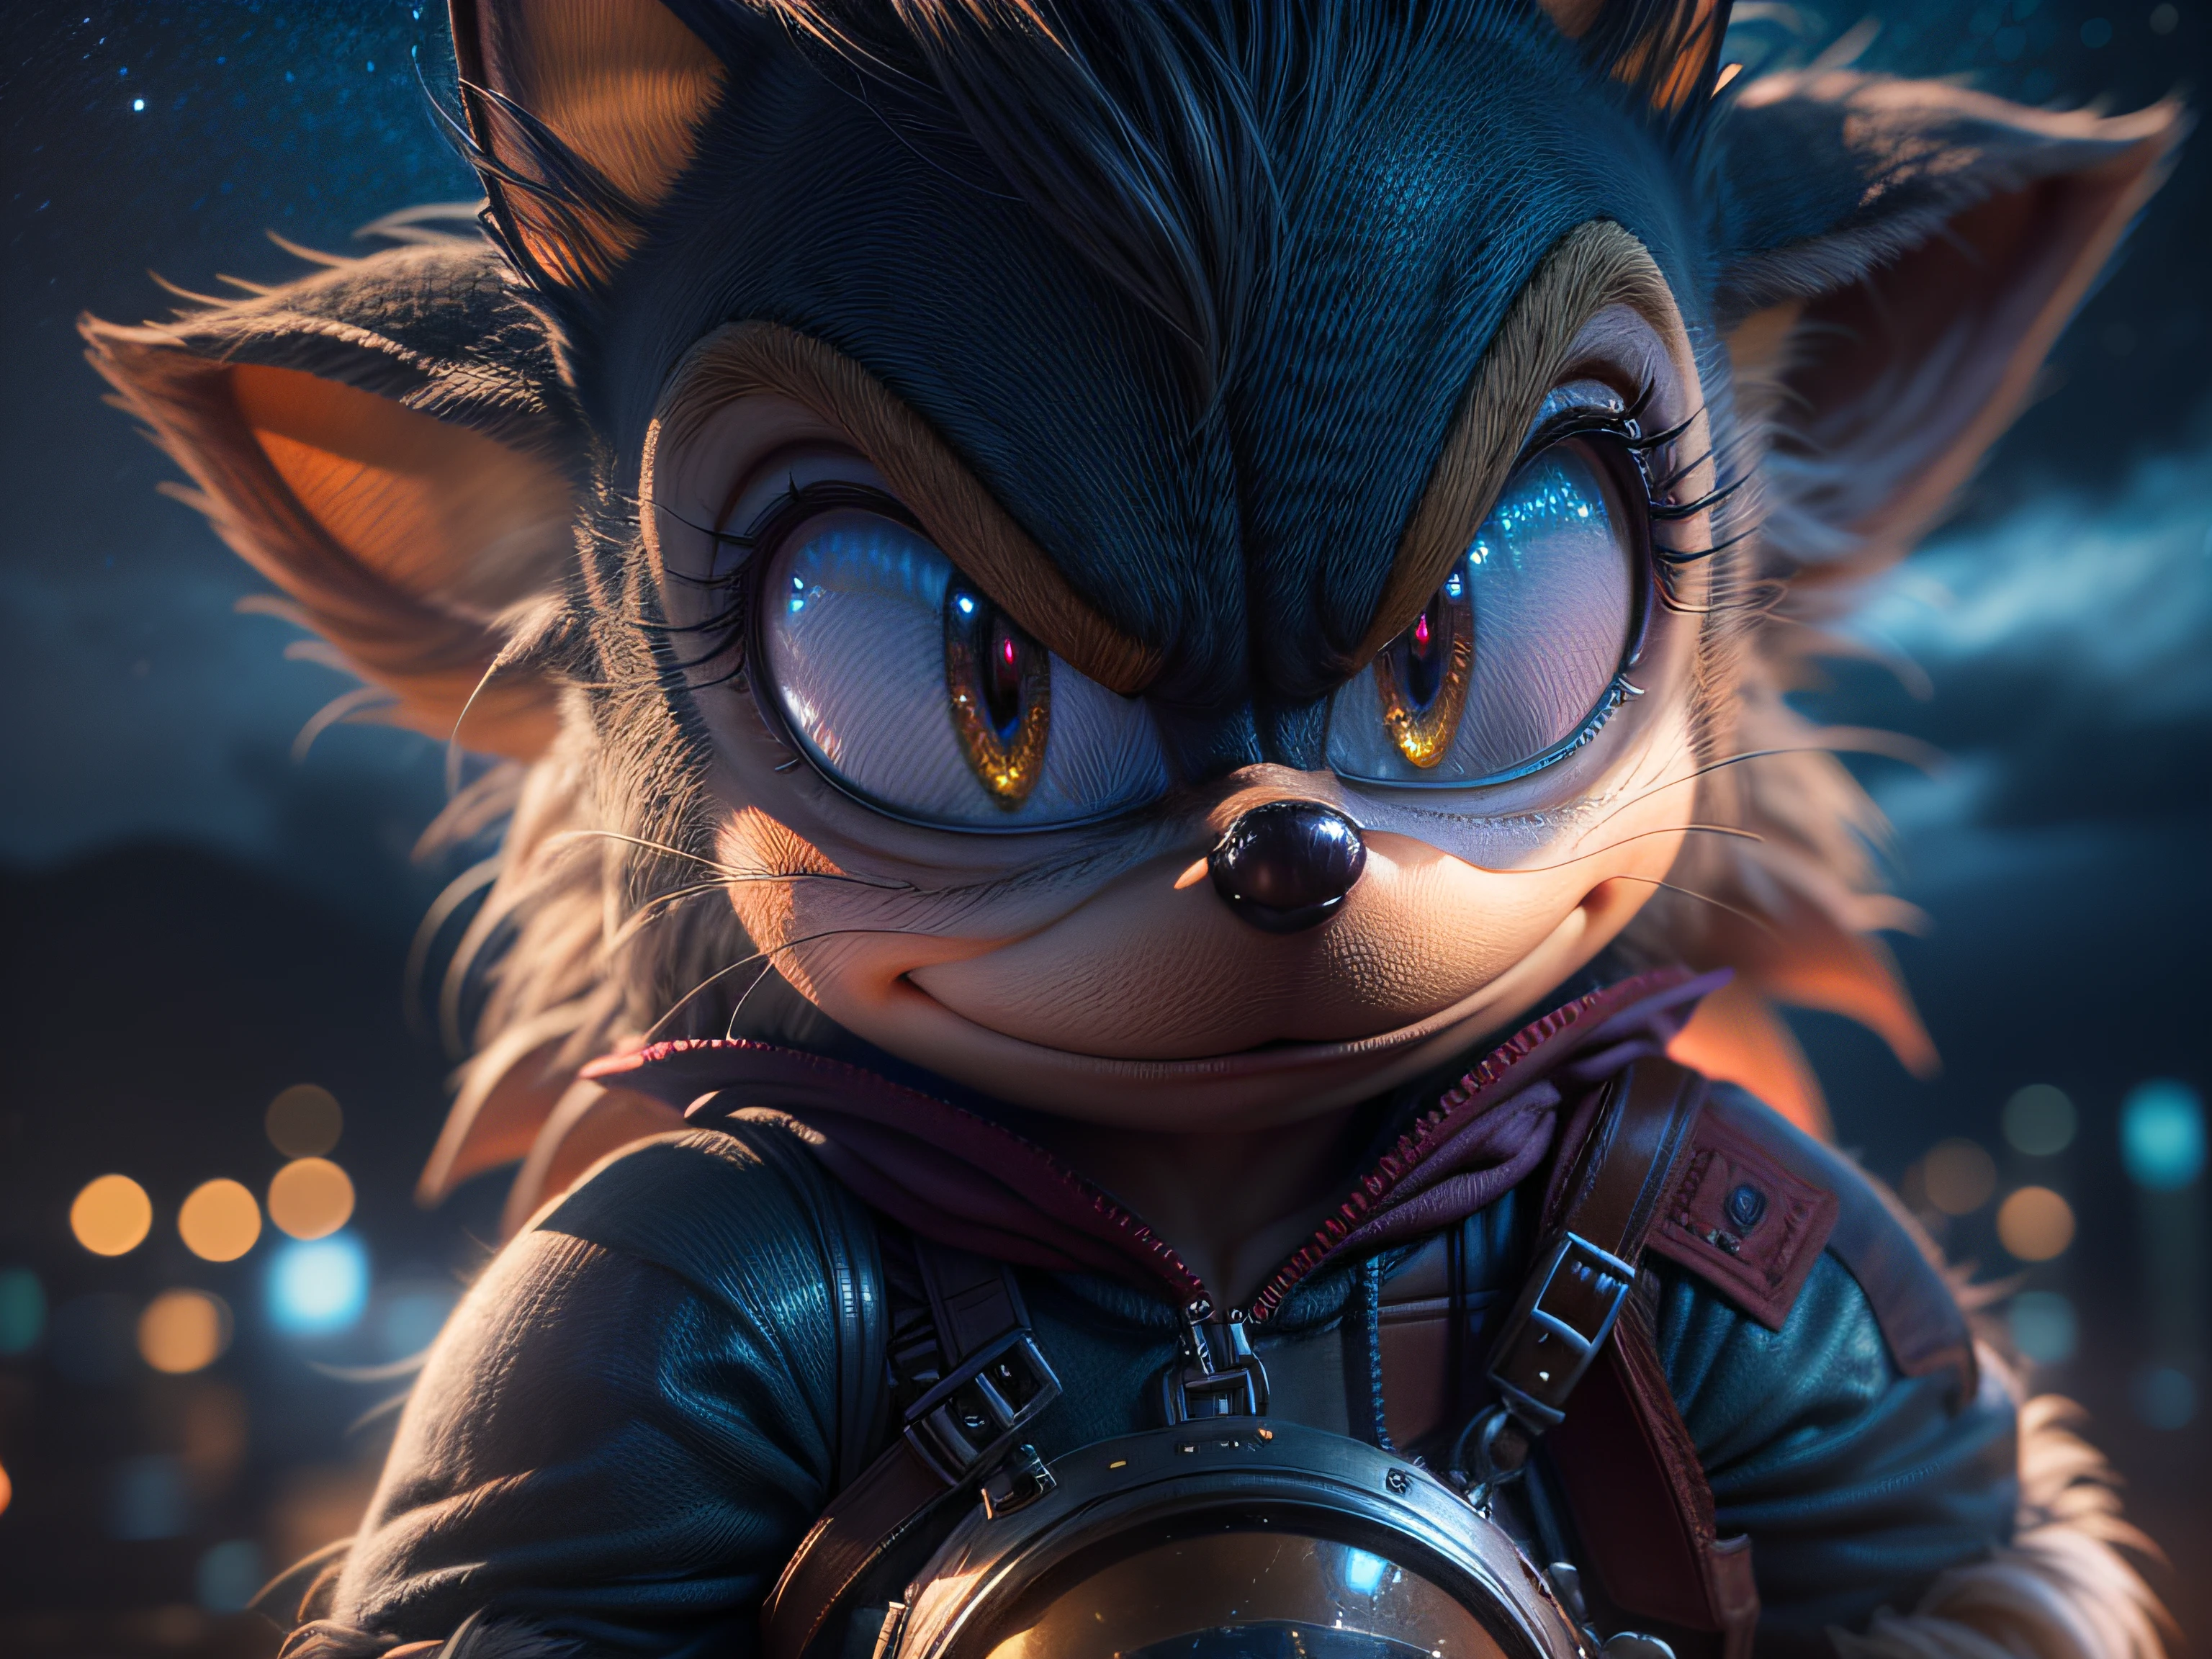 Close a powerful threat, Sonic's imposing appearance, The Hedgehog, menacing stare, ricamente detalhado, Hiper realista, 3D-rendering, obra-prima, NVIDIA, RTX, ray-traced, Bokeh, Night sky with a huge and beautiful full moon, estrelas brilhando,